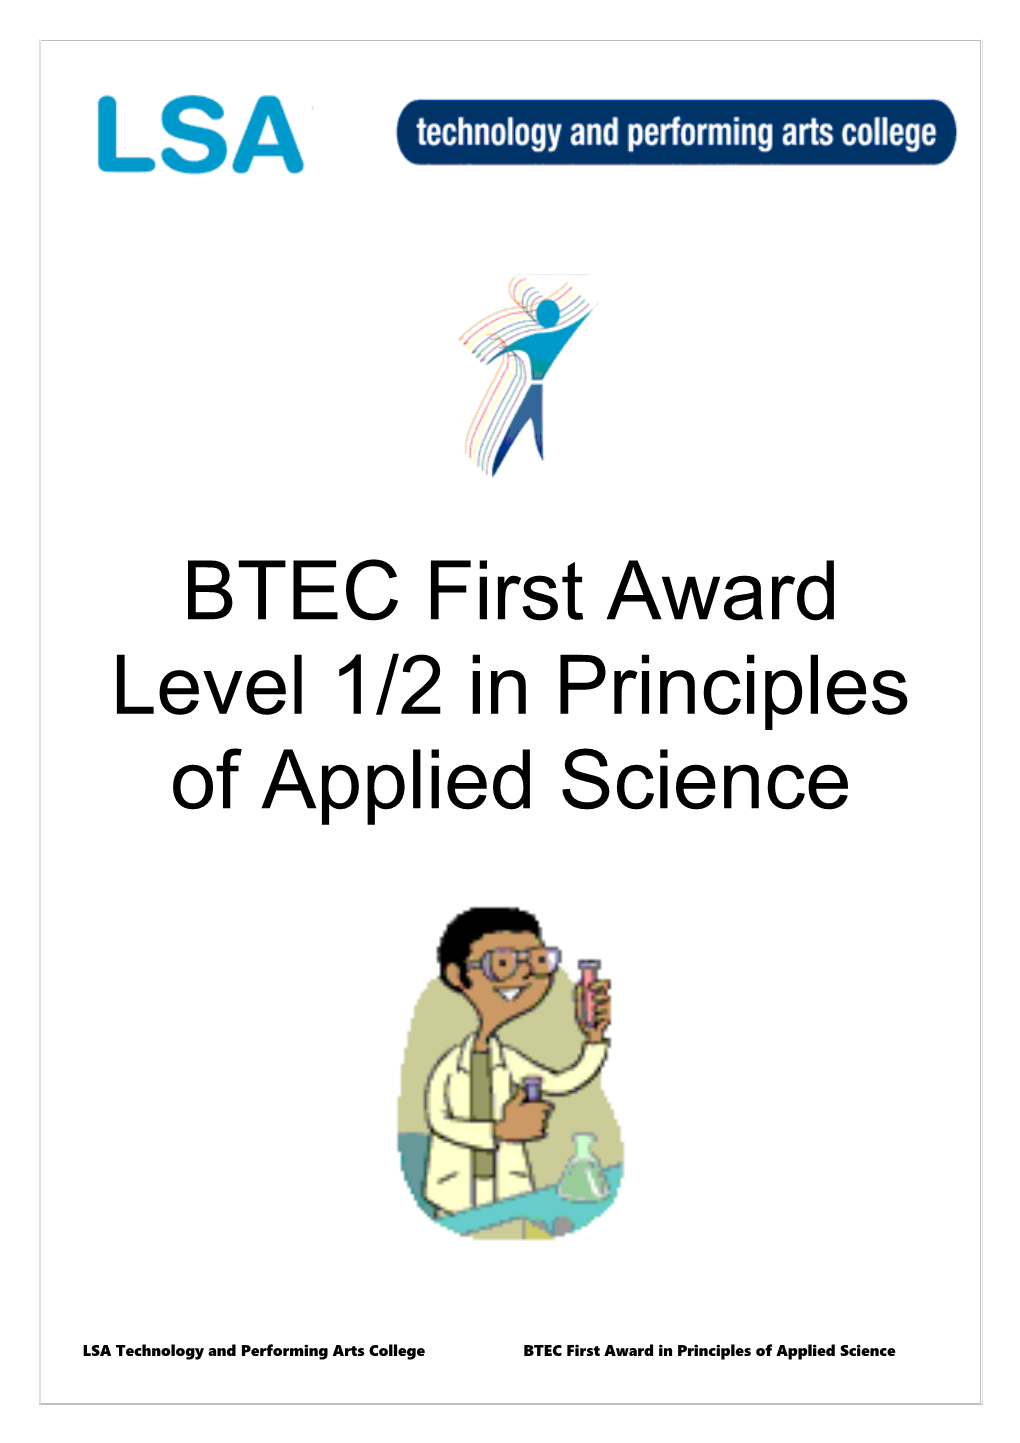 BTEC First Award Level 1/2 in Principles of Applied Science